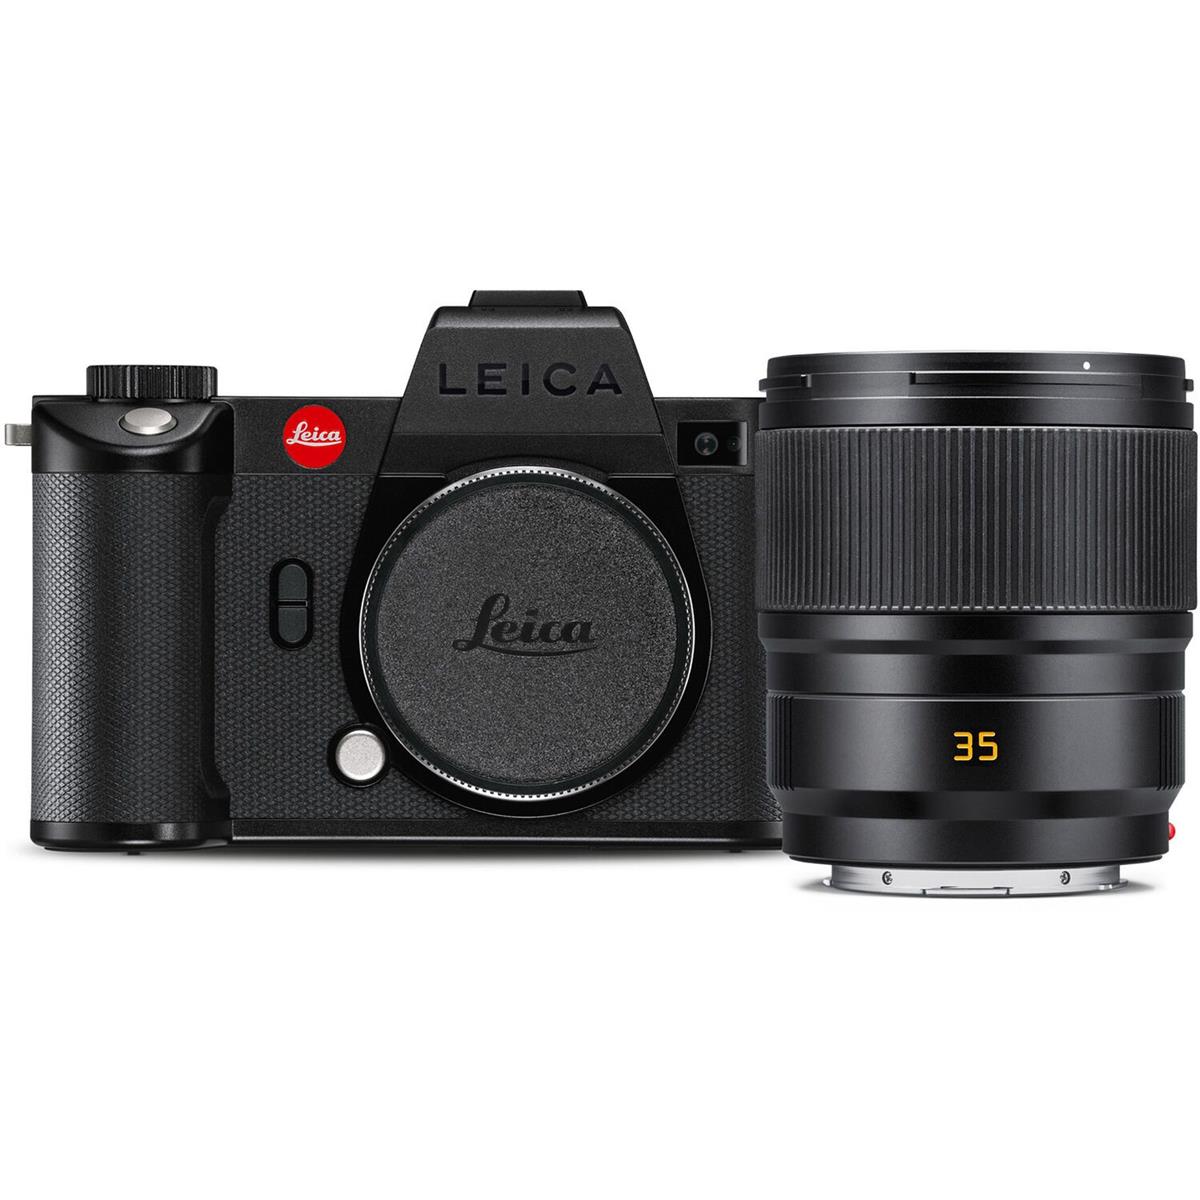 Image of Leica SL2-S Mirrorless Camera with Summicron-SL 35mm f/2 ASPH Lens